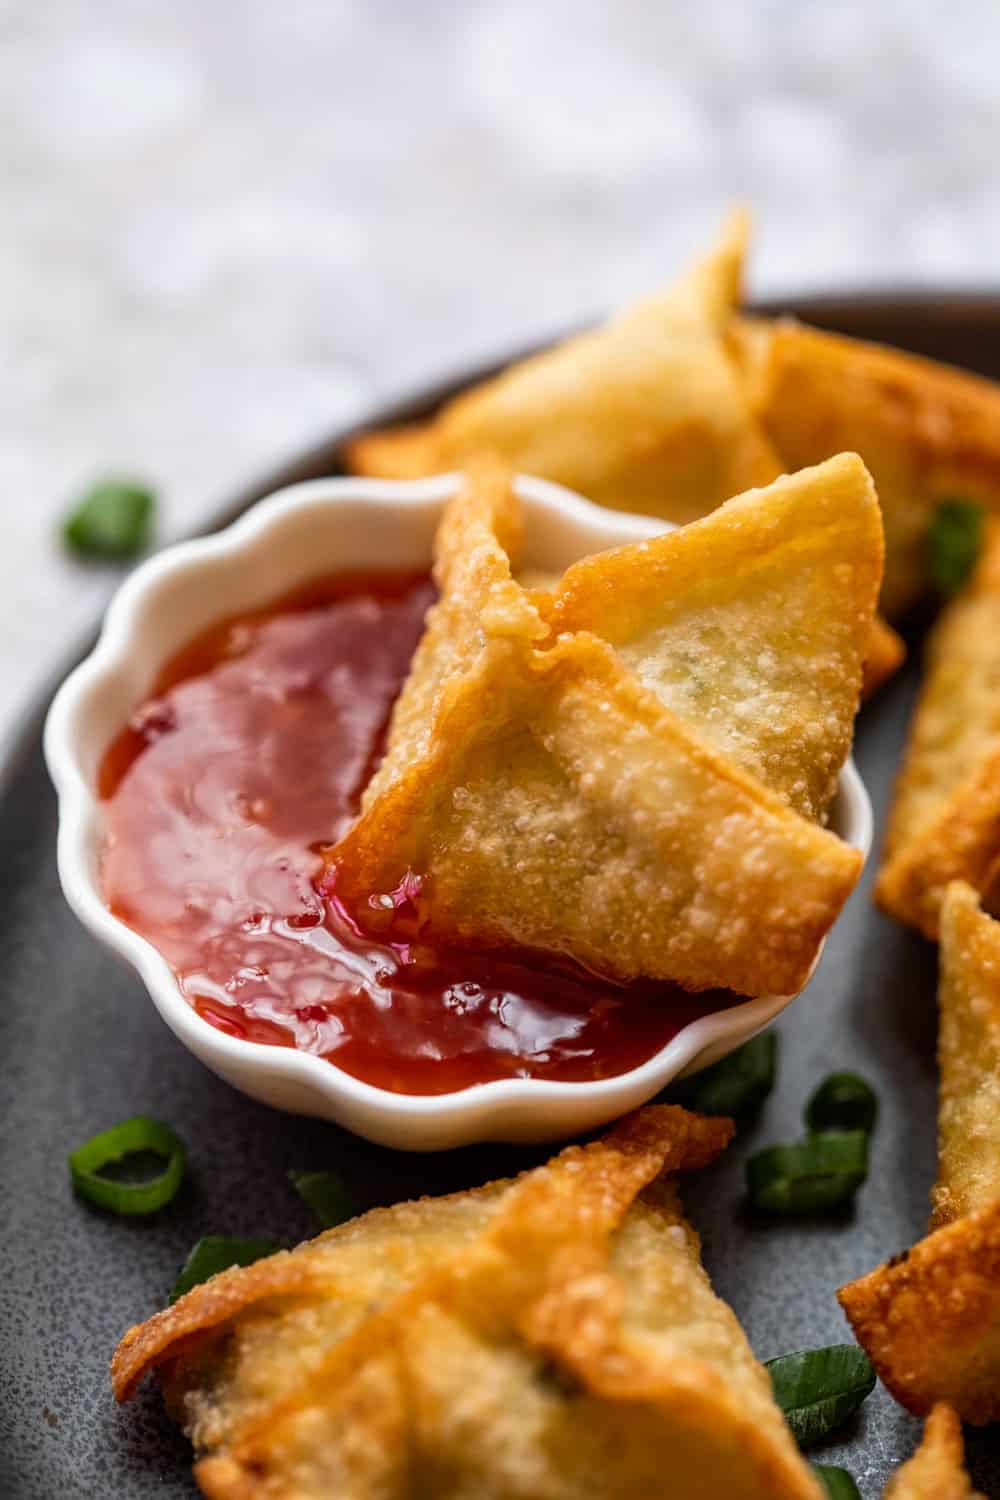 Crab rangoon being dipped in sweet and spicy sauce